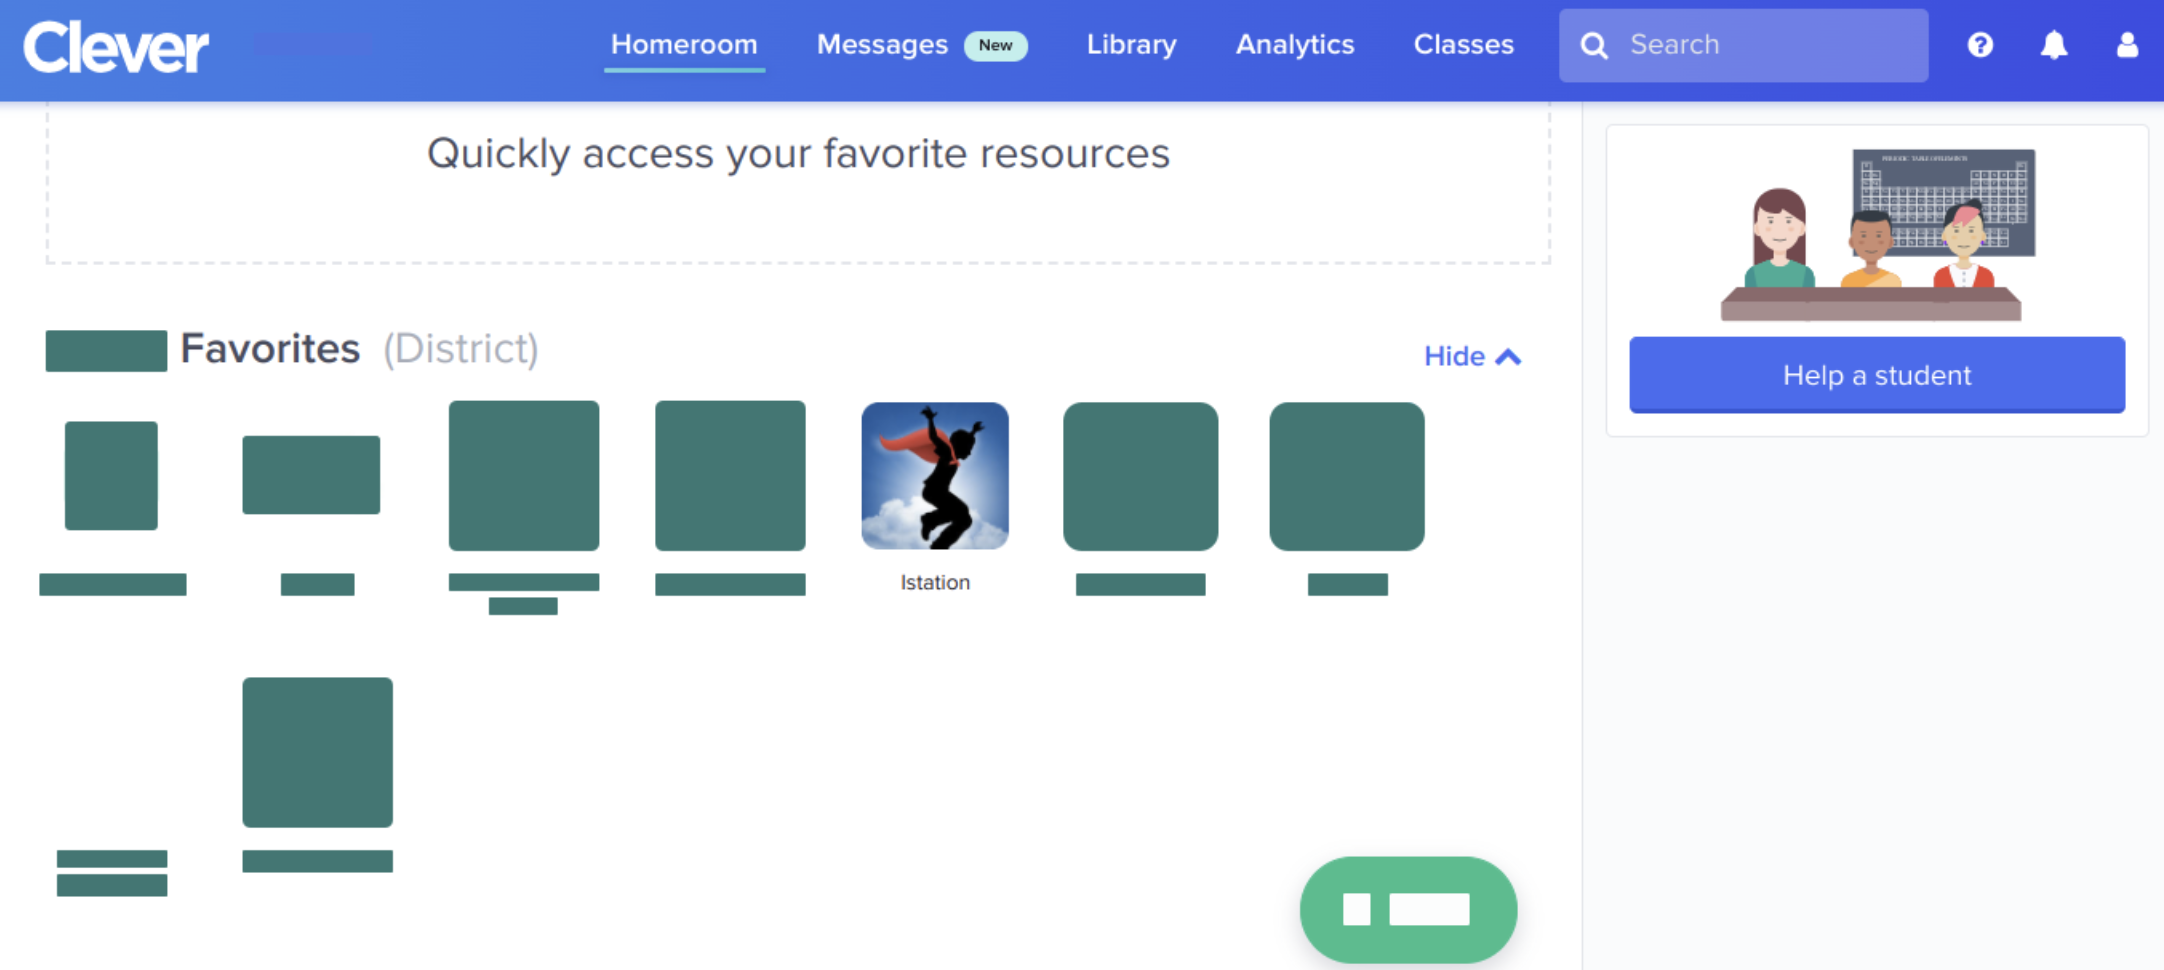 The clever dashboard is open to the homeroom tab with several options including Istation.